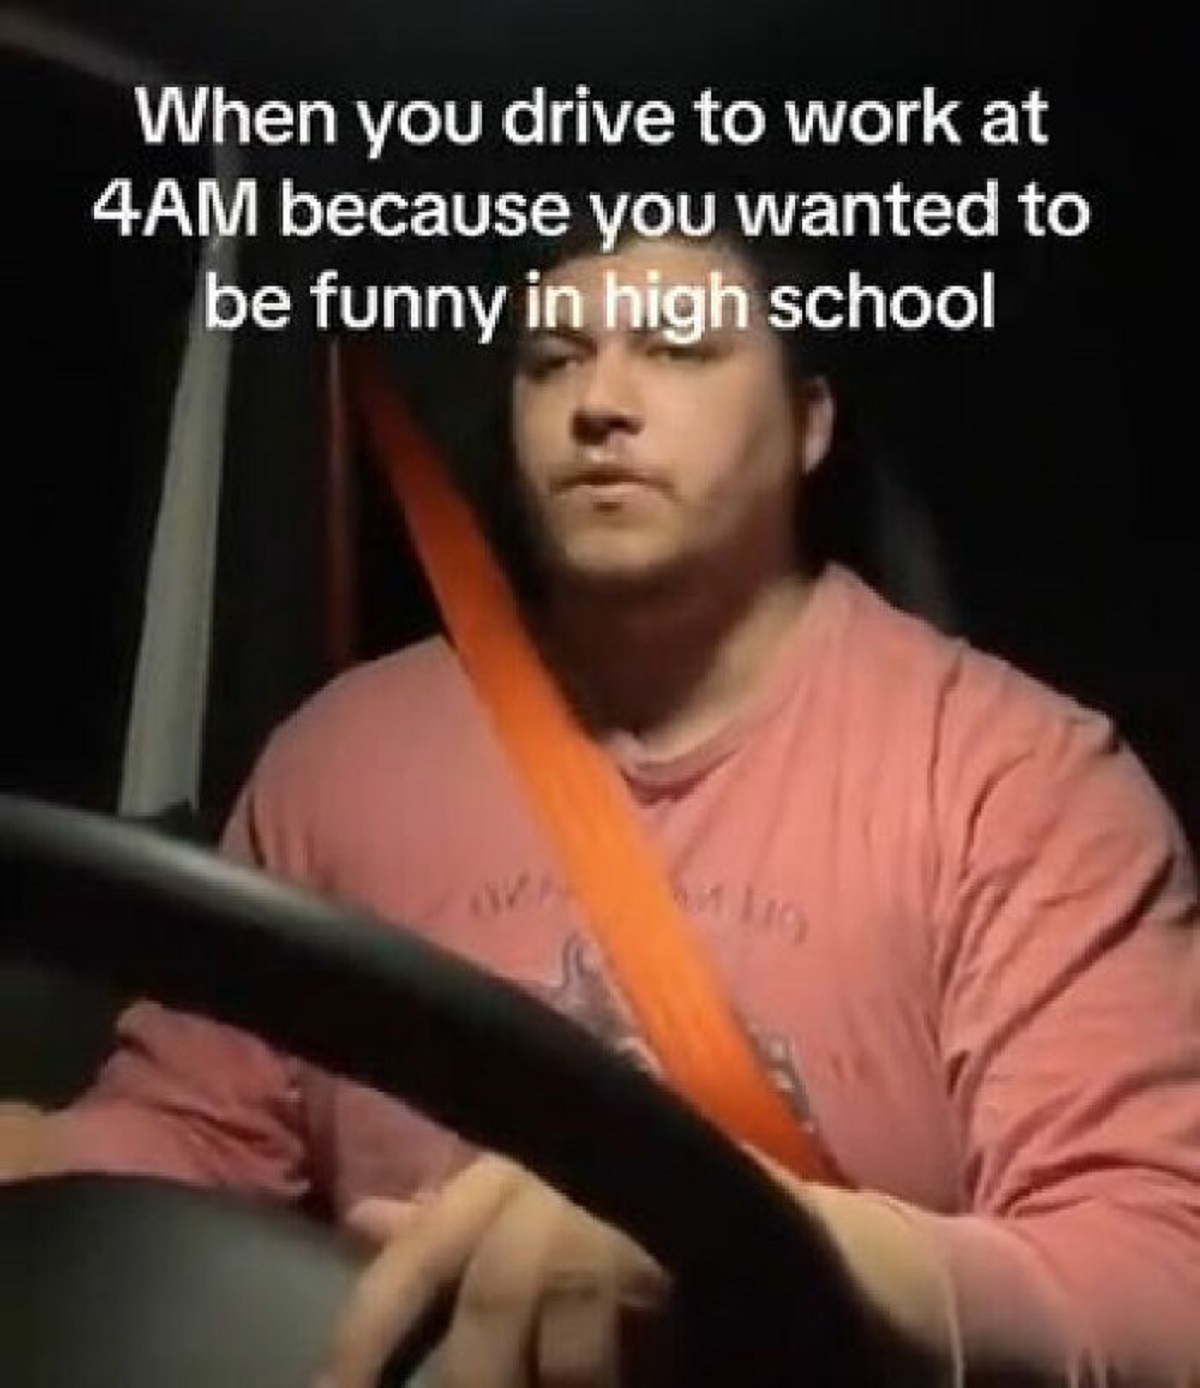 dark humor memes - When you drive to work at 4AM because you wanted to be funny in high school